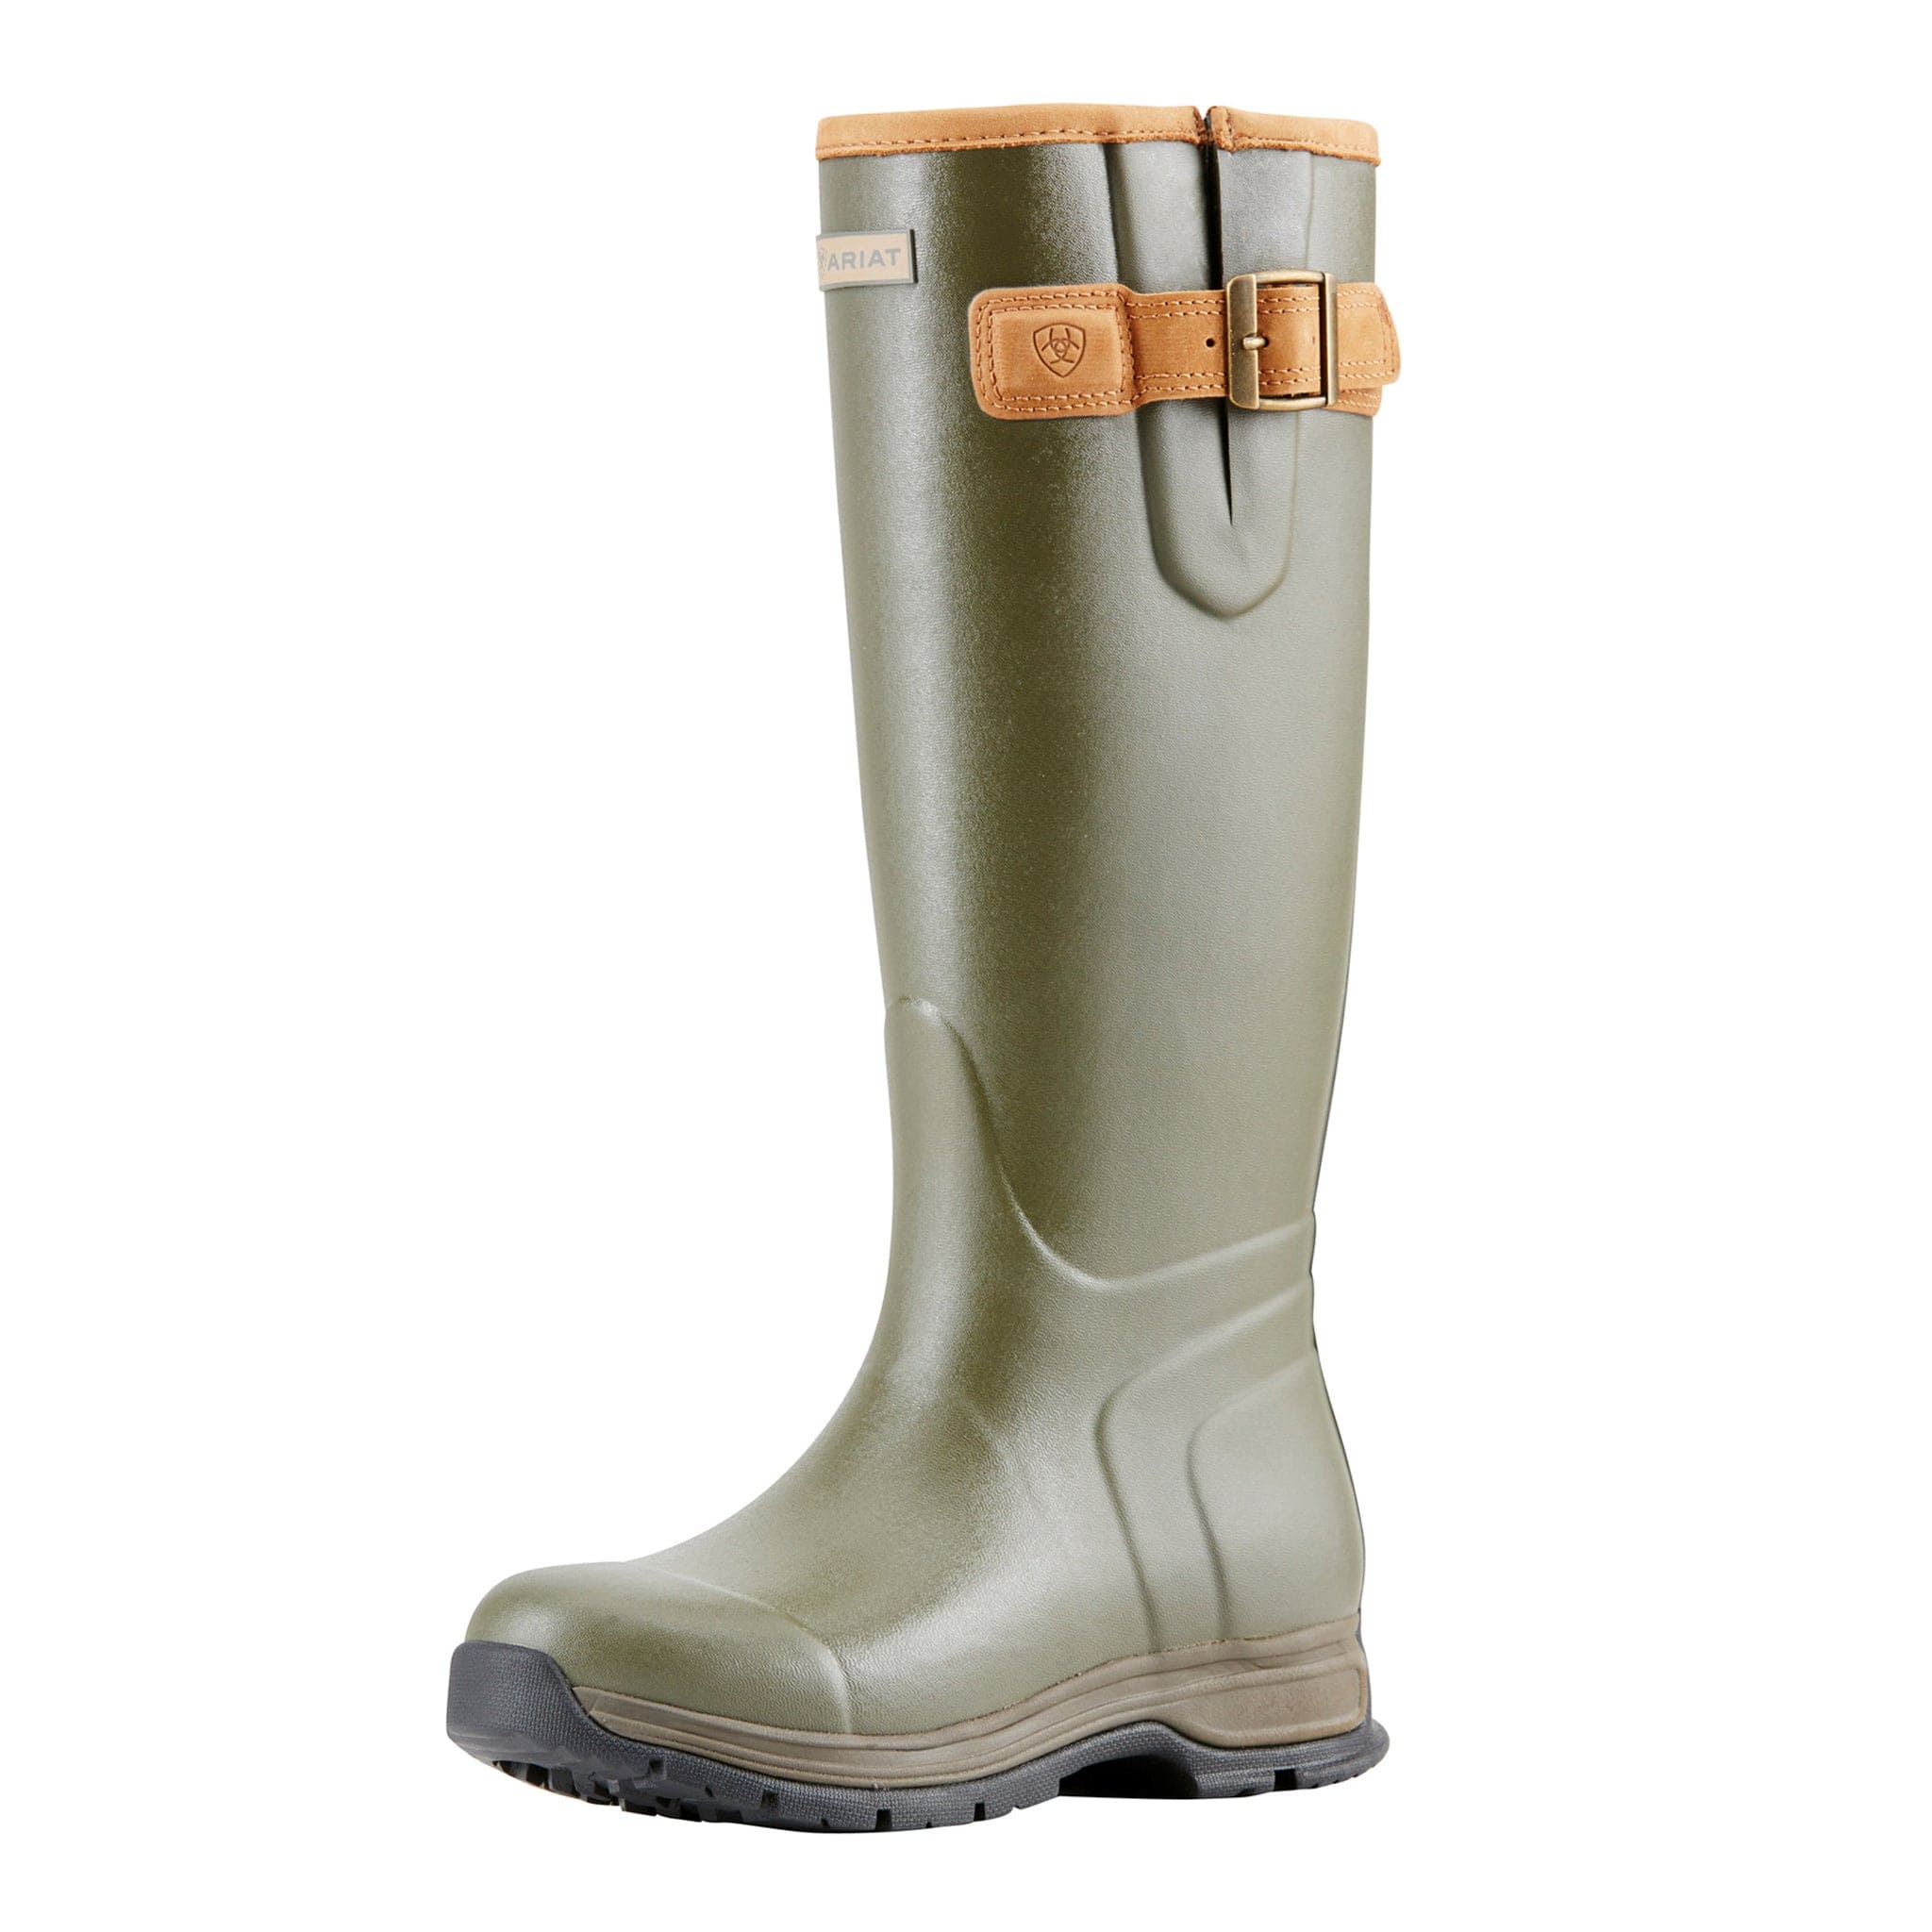 Ariat Burford Insulated Wellington Boots 10018853 Olive Green Front Side